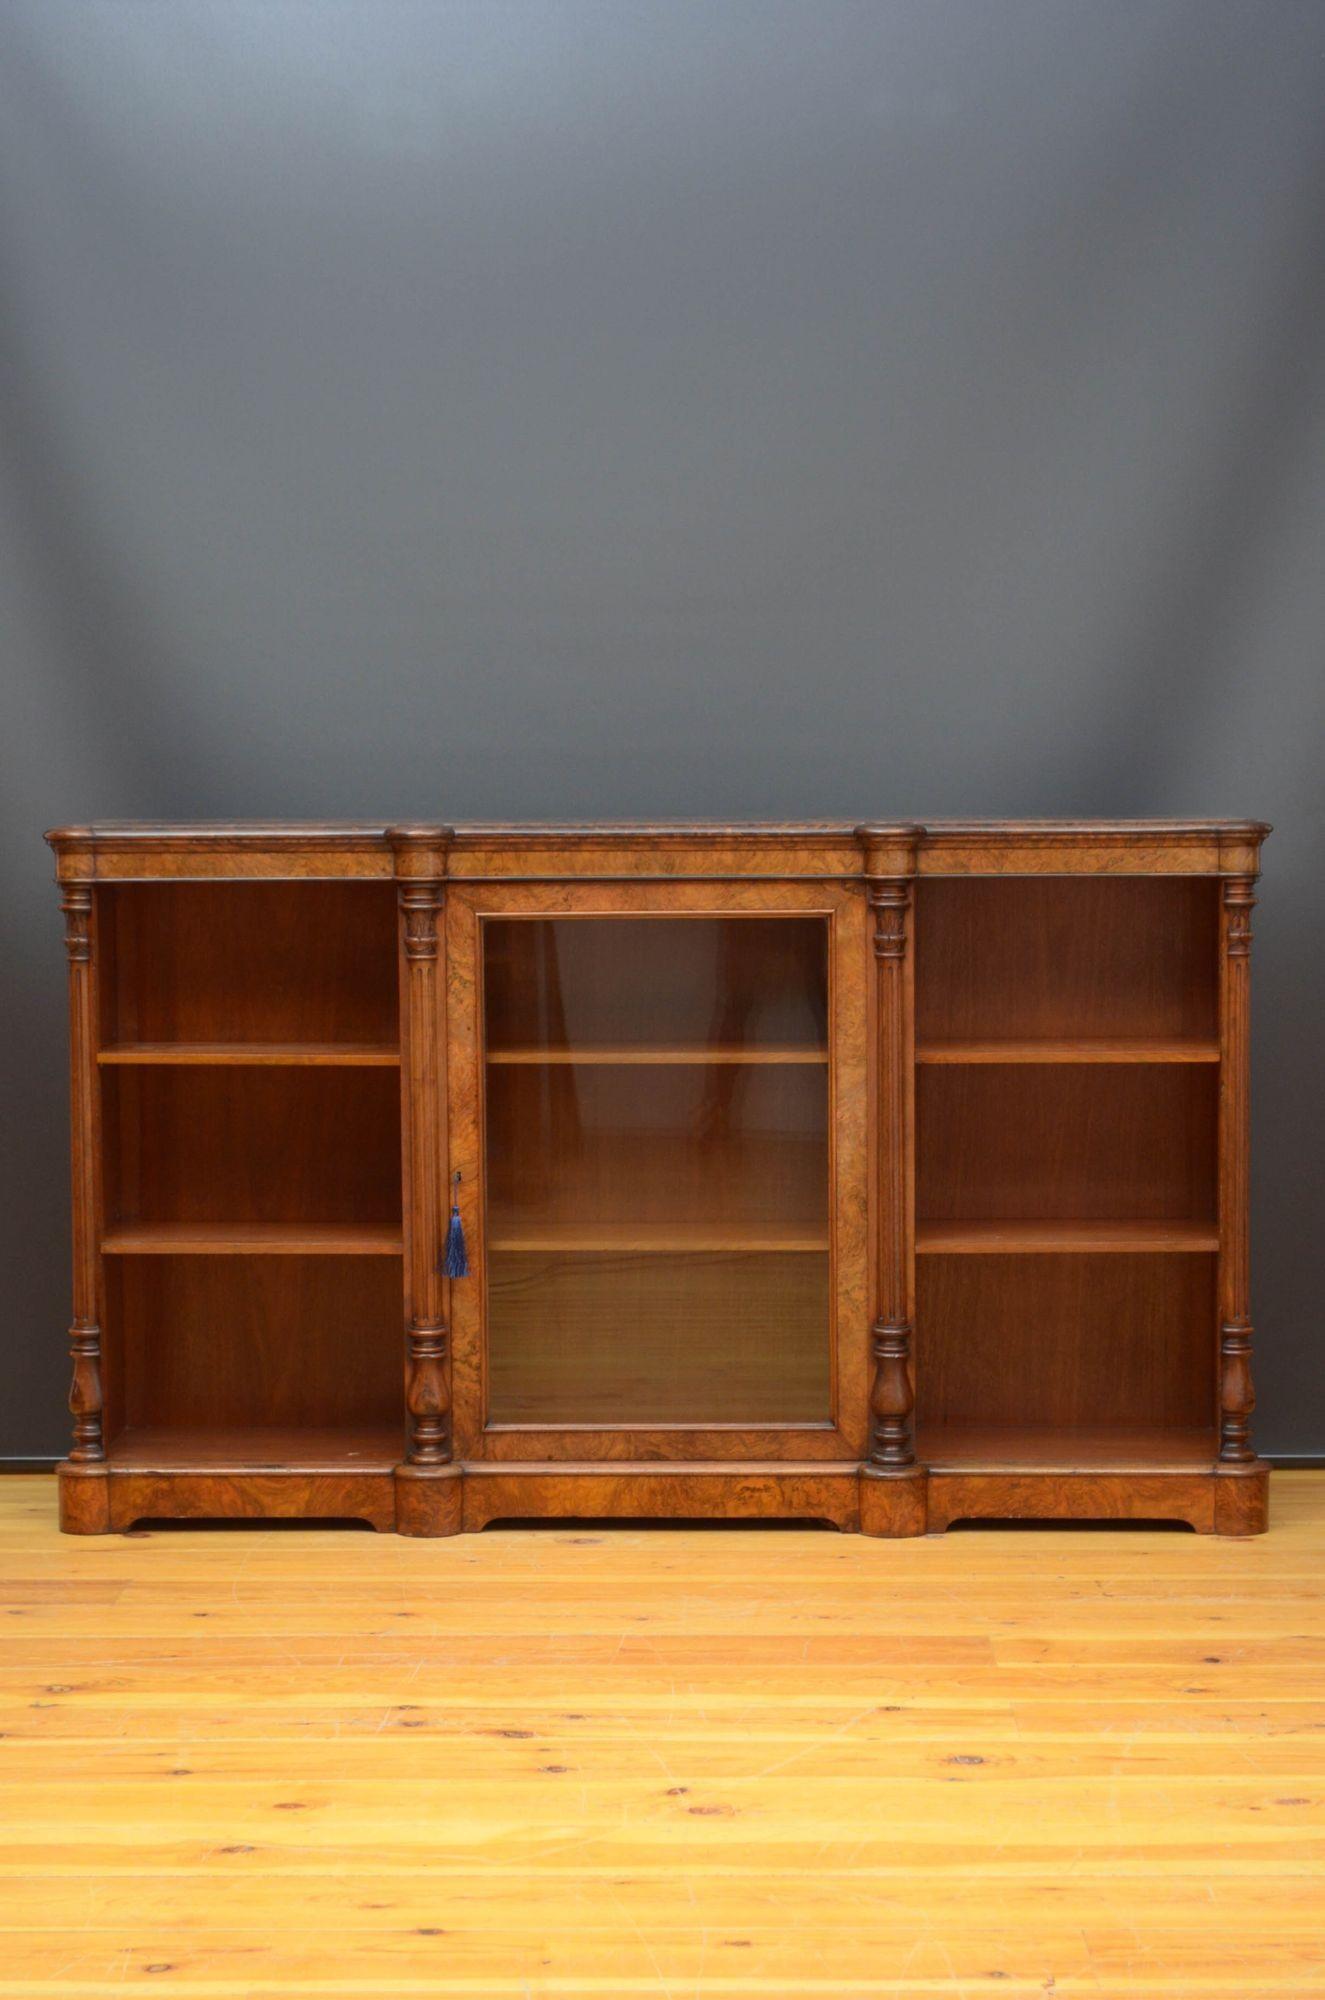 Victorian Walnut Bookcase or Display Cabinet In Good Condition For Sale In Whaley Bridge, GB